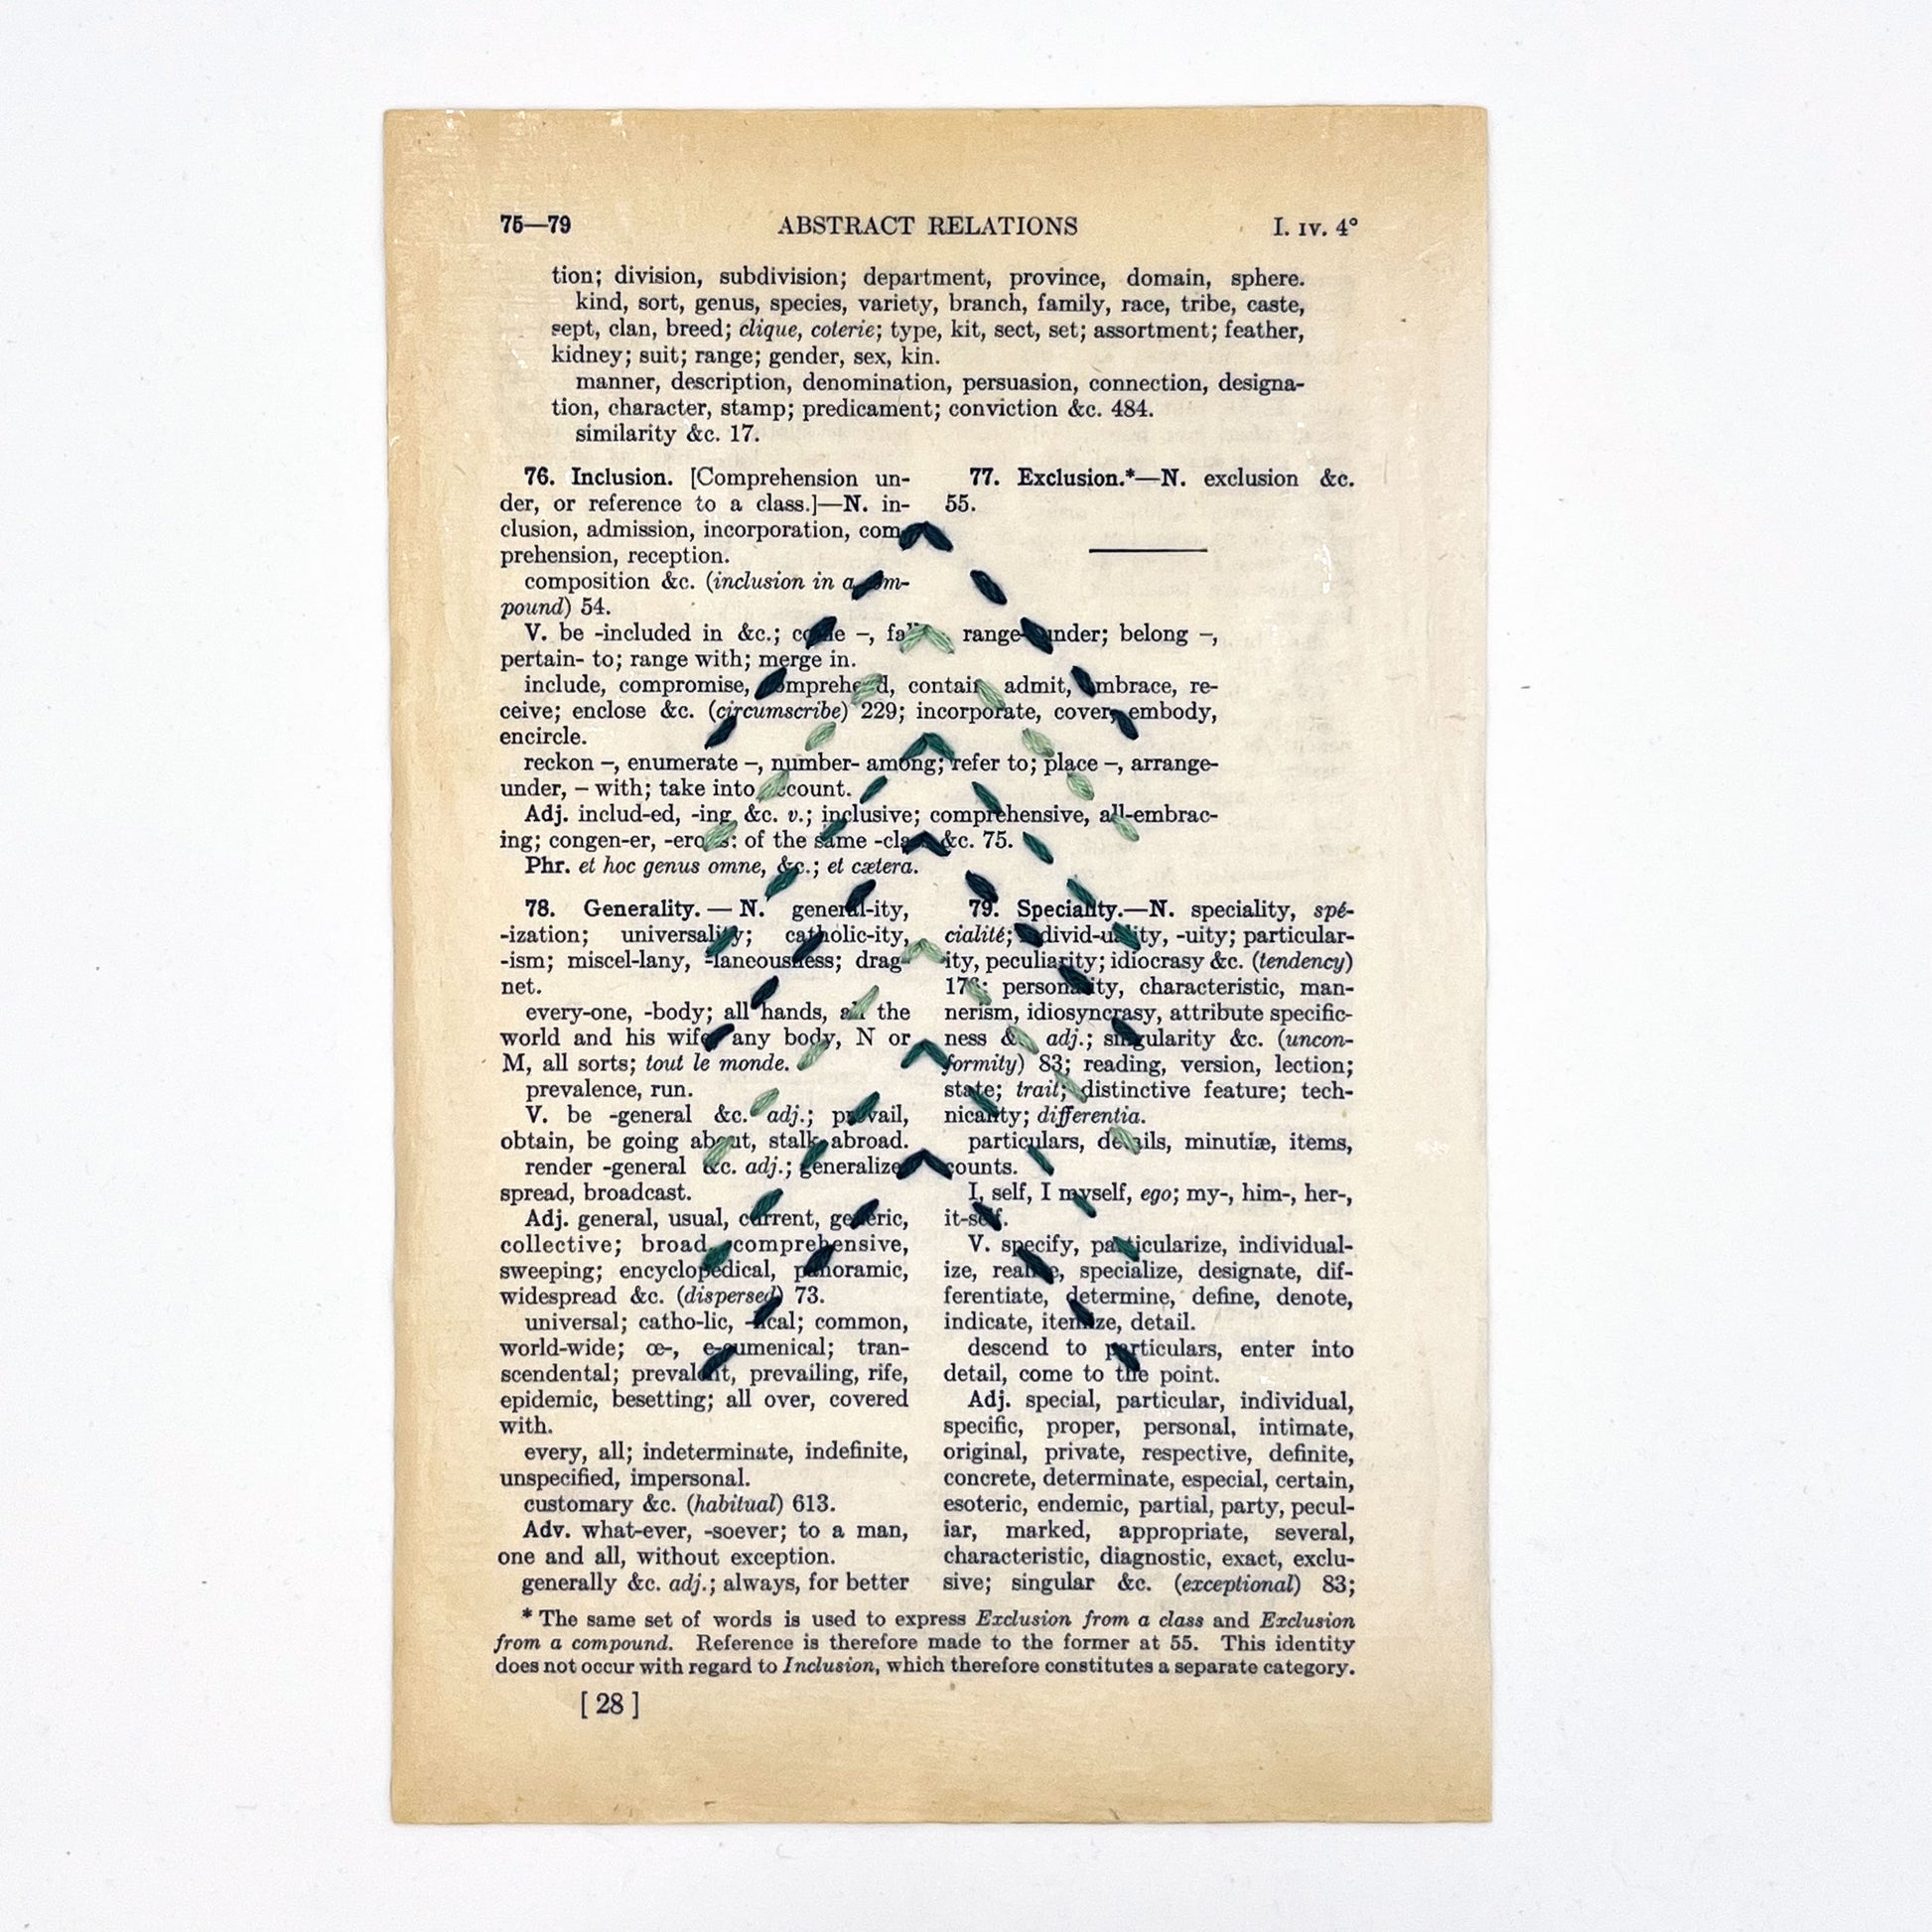 a vintage thesaurus page, embroidered with the shape of a Christmas tree made from running stitches forming a column of chevrons, in shades of pine green thread, on a white background. the page itself has words like inclusion and generality on it